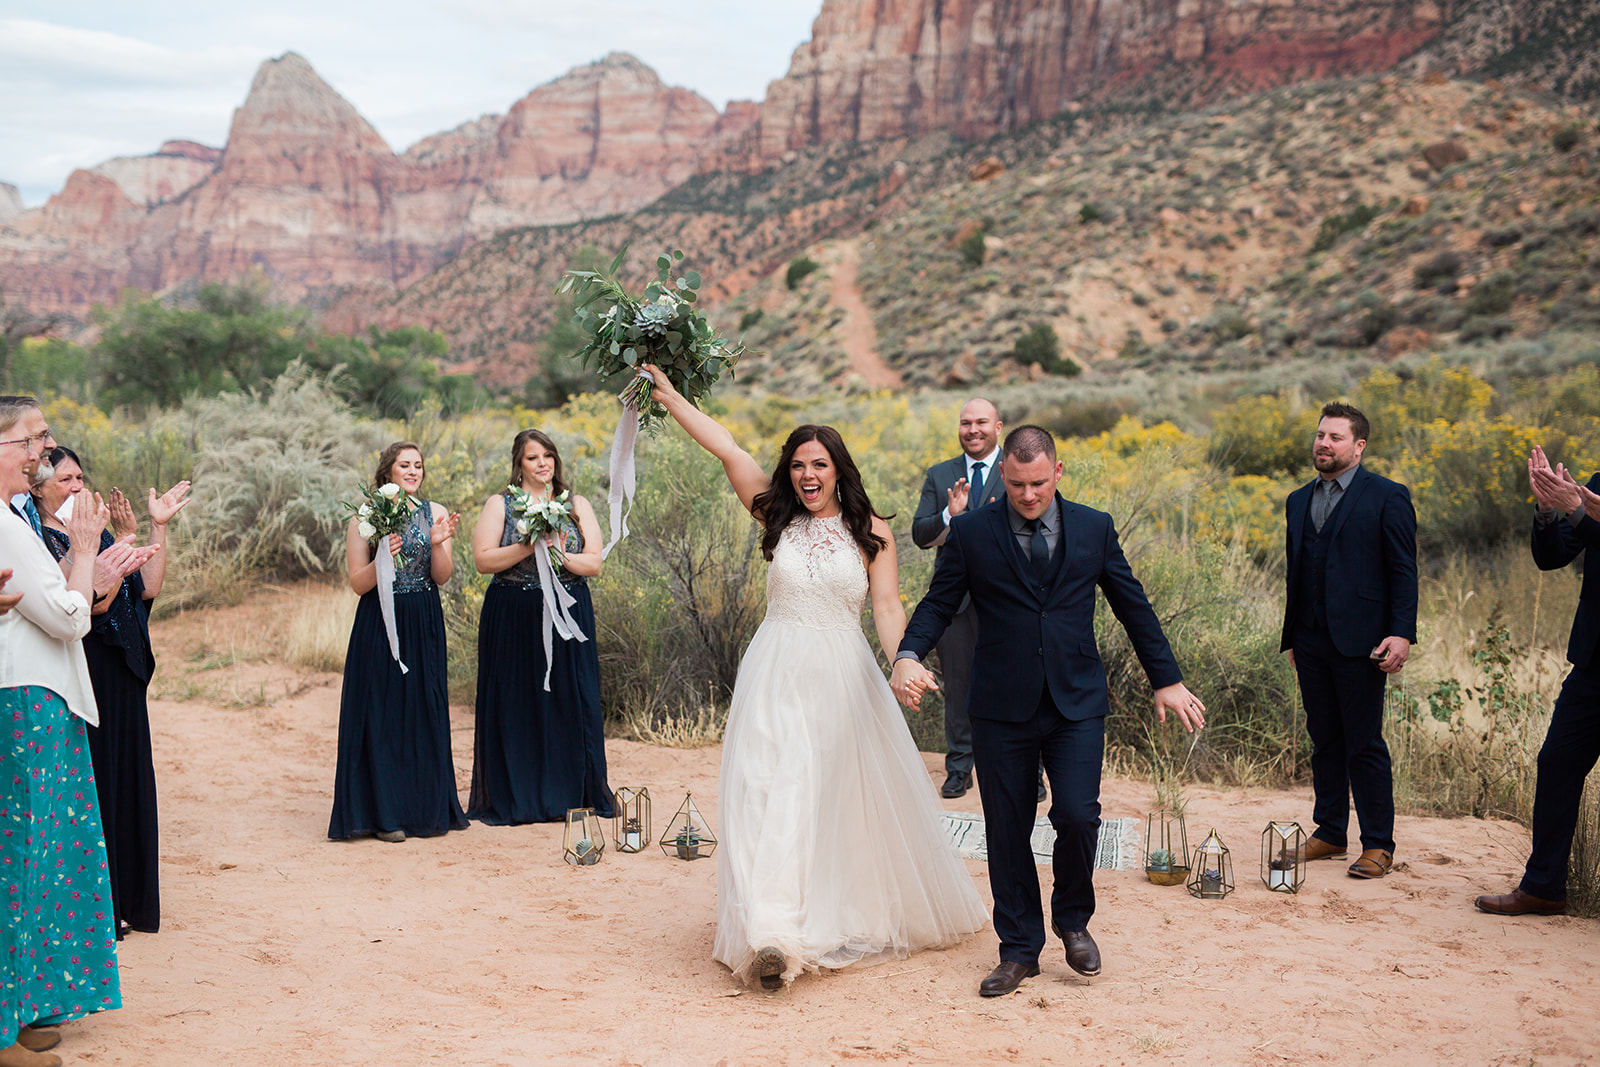 Bride and Groom walk back down the aisle after elopement in Zion National Park